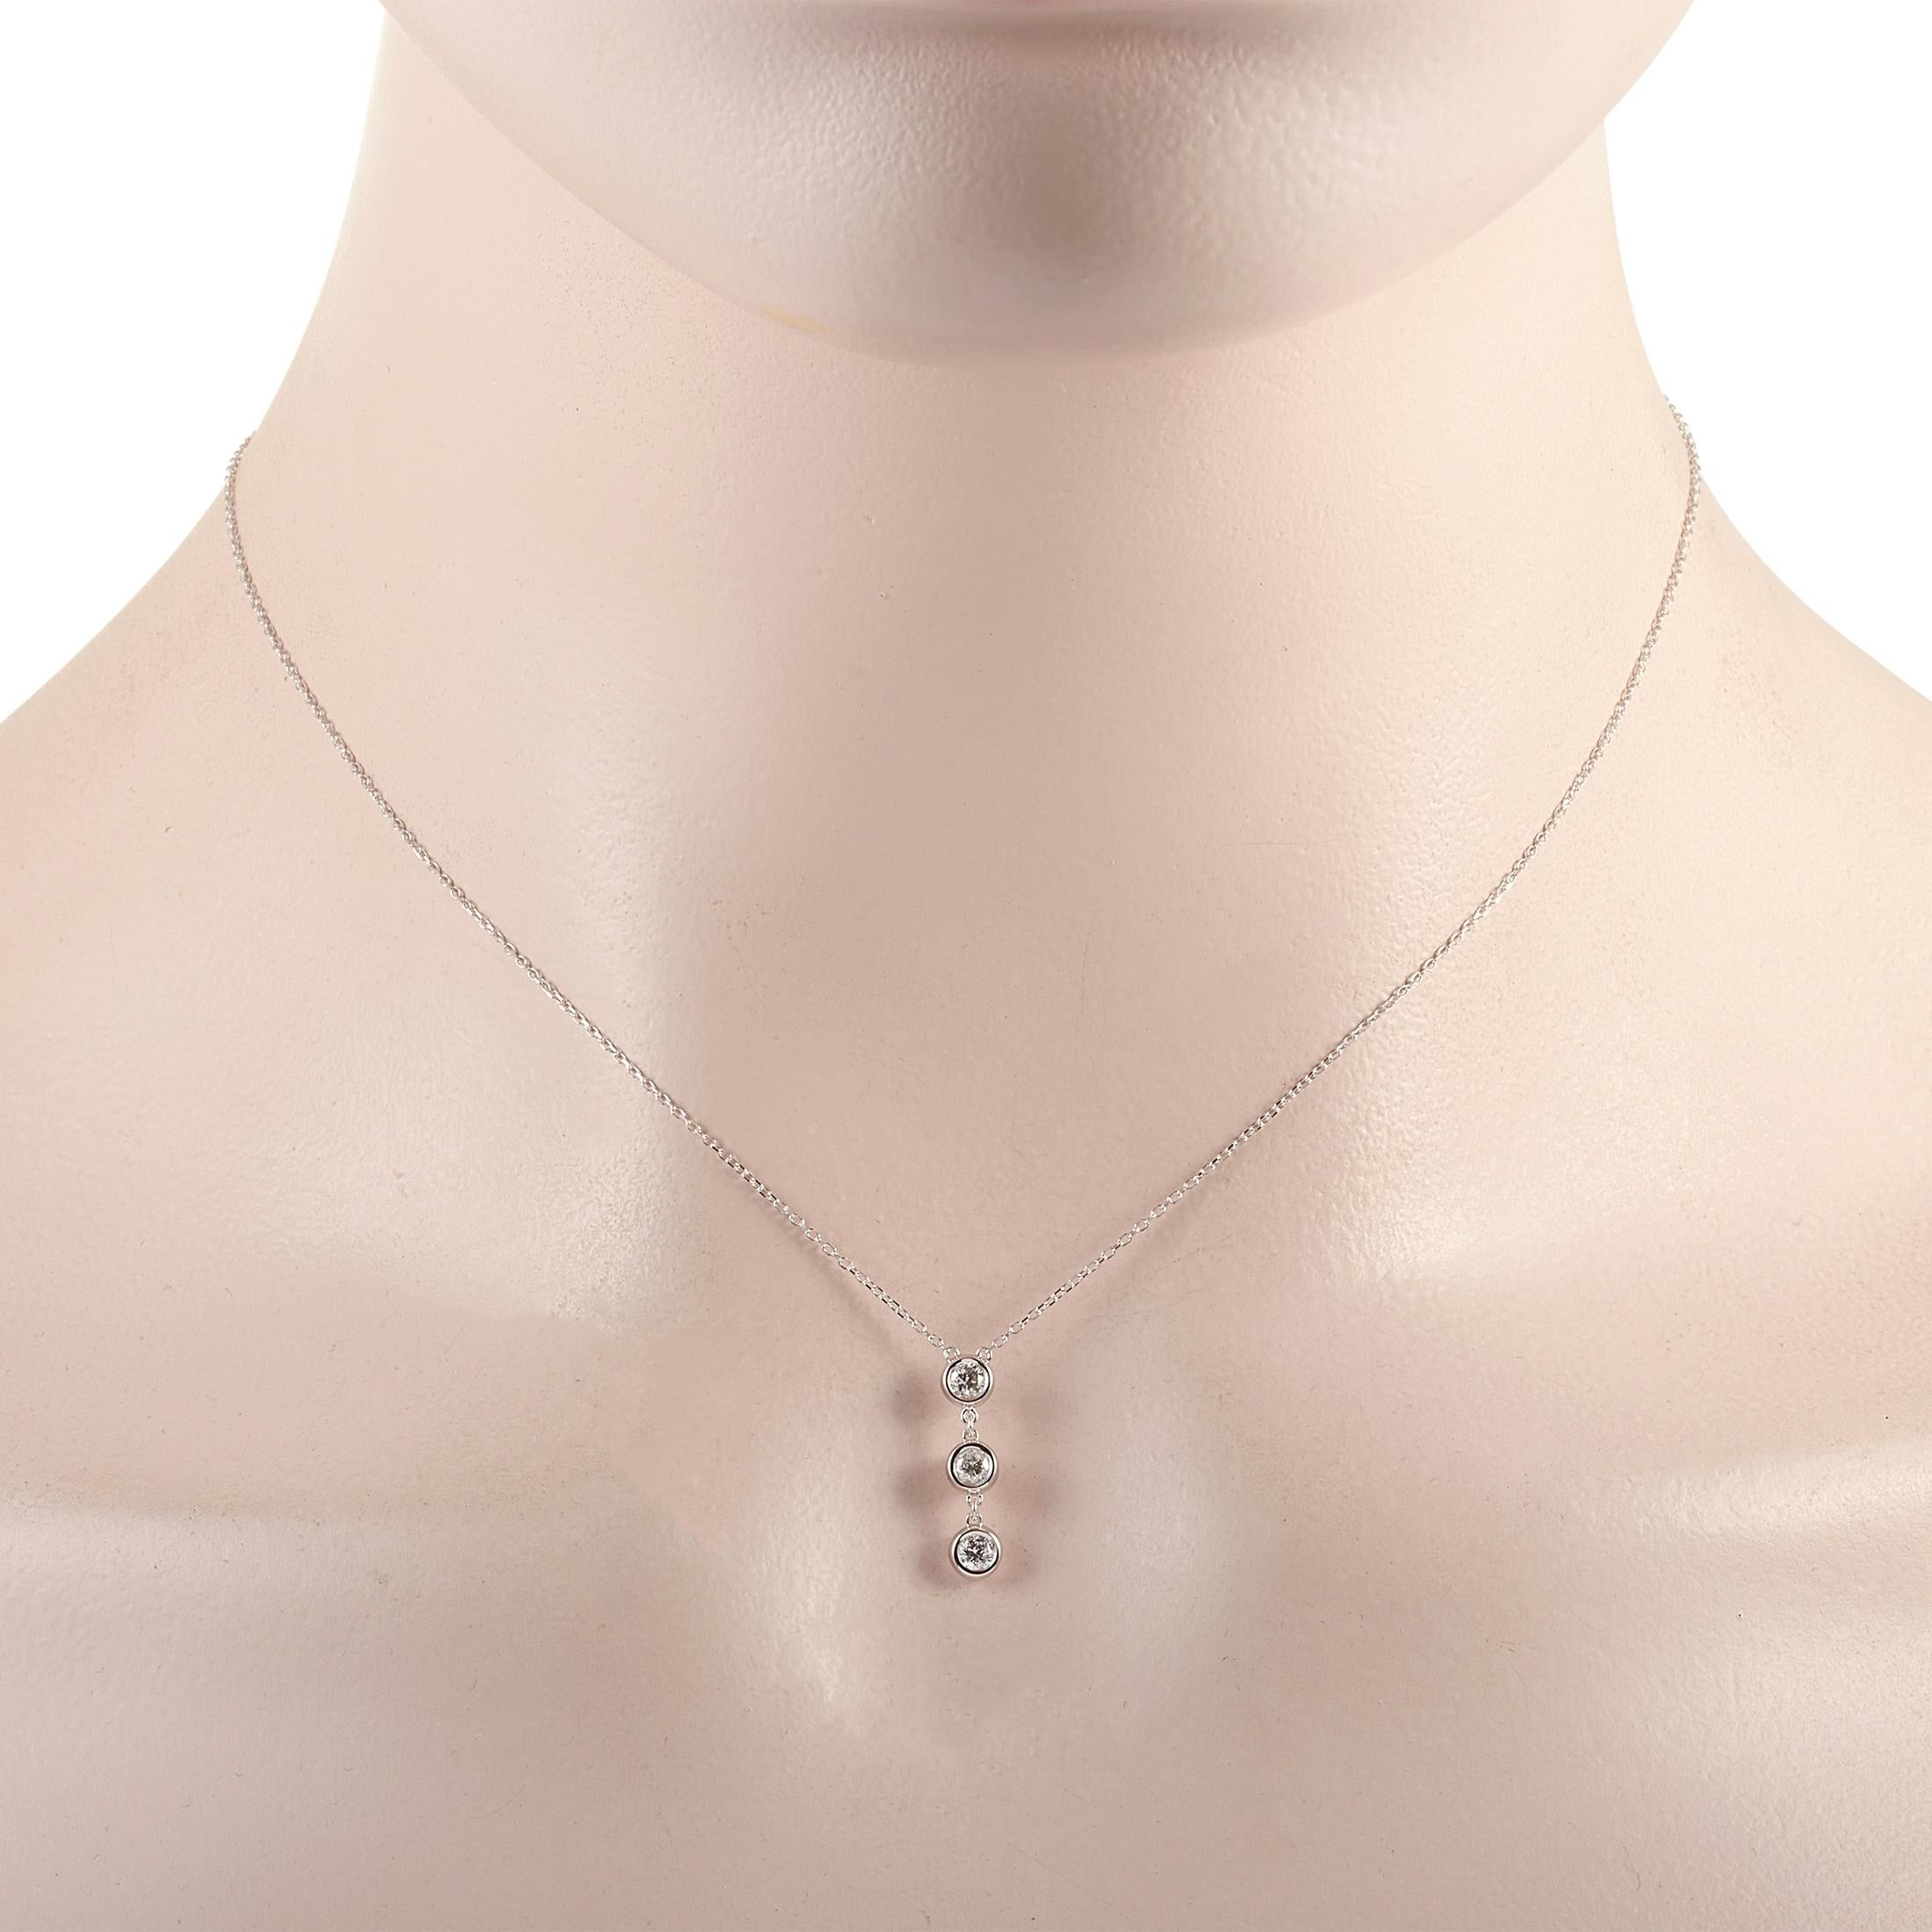 This LB Exclusive necklace is crafted from 14K white gold and weighs 1.6 grams. It is presented with a 15” chain and boasts a pendant that measures 0.63” in length and 0.13” in width. The necklace is set with diamonds that total 0.25 carats.
 
